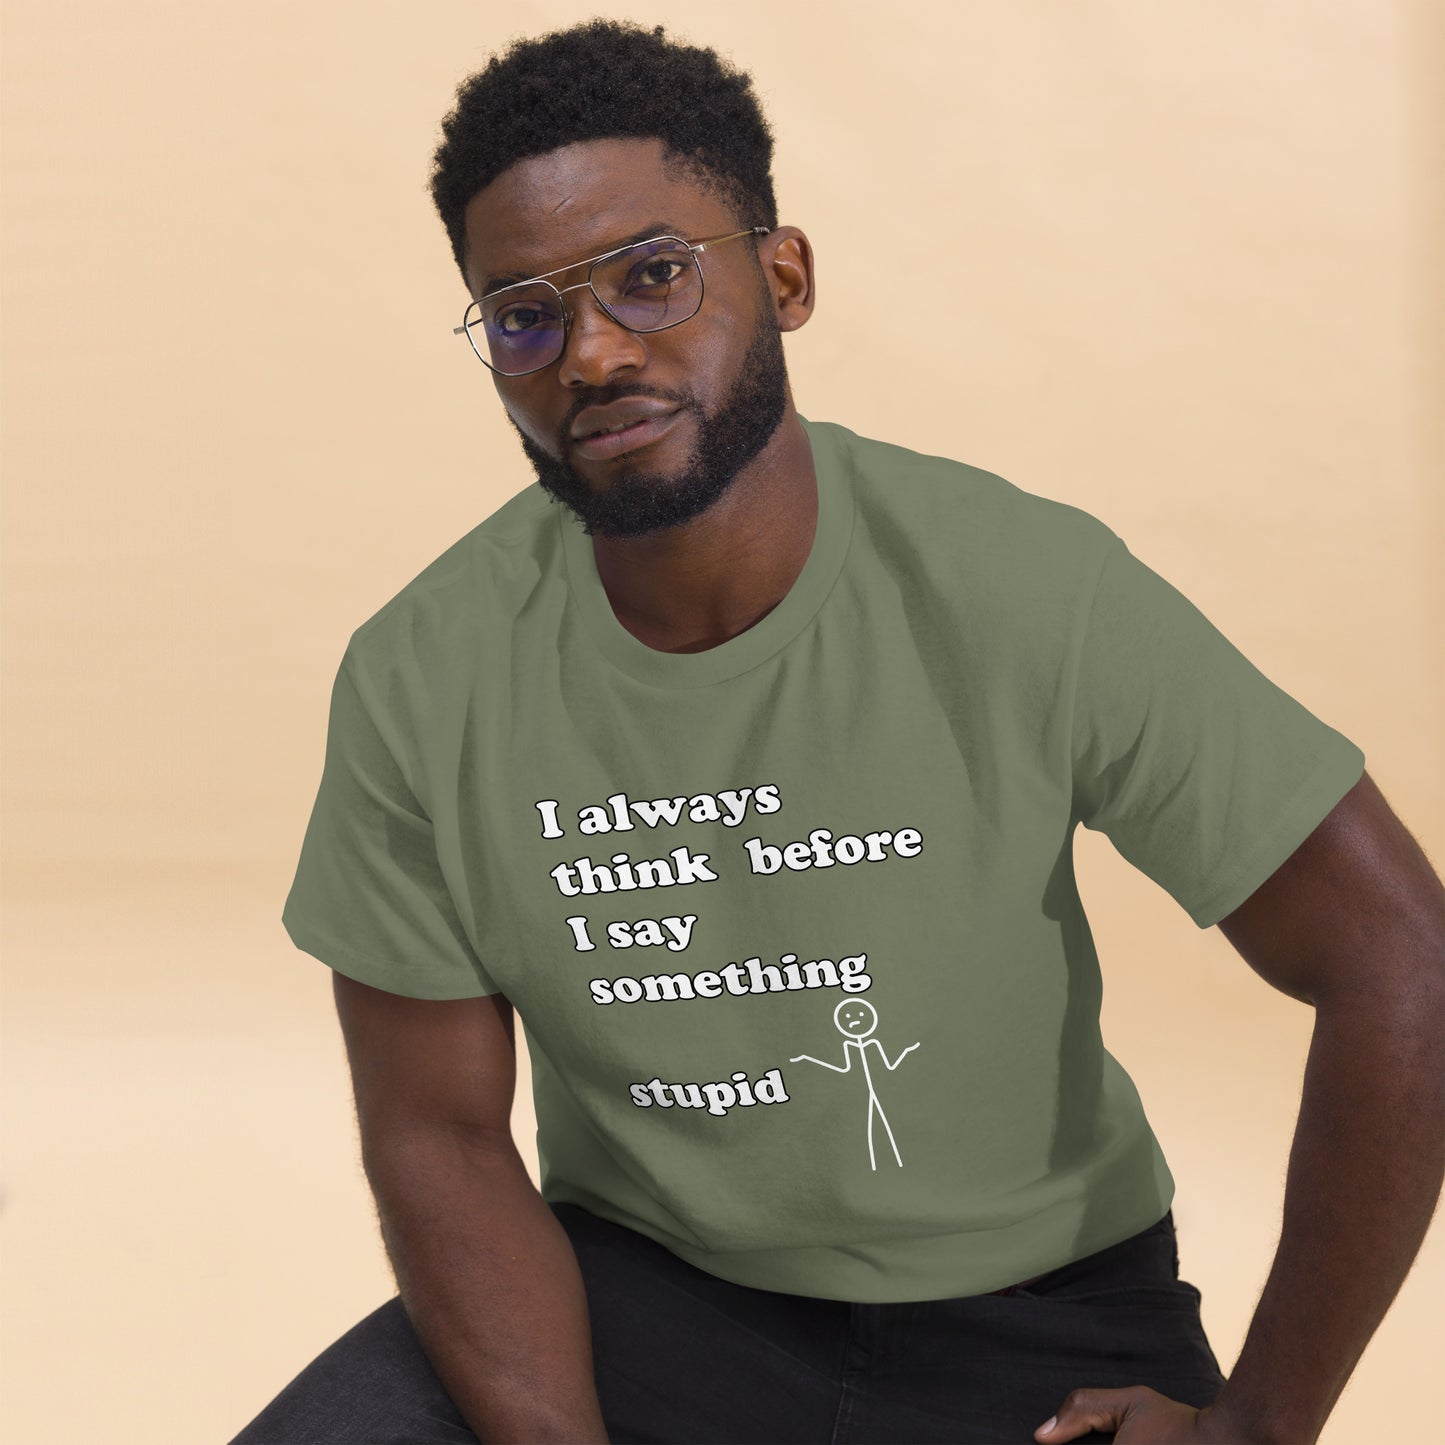 Man with military green t-shirt with text "I always think before I say something stupid"